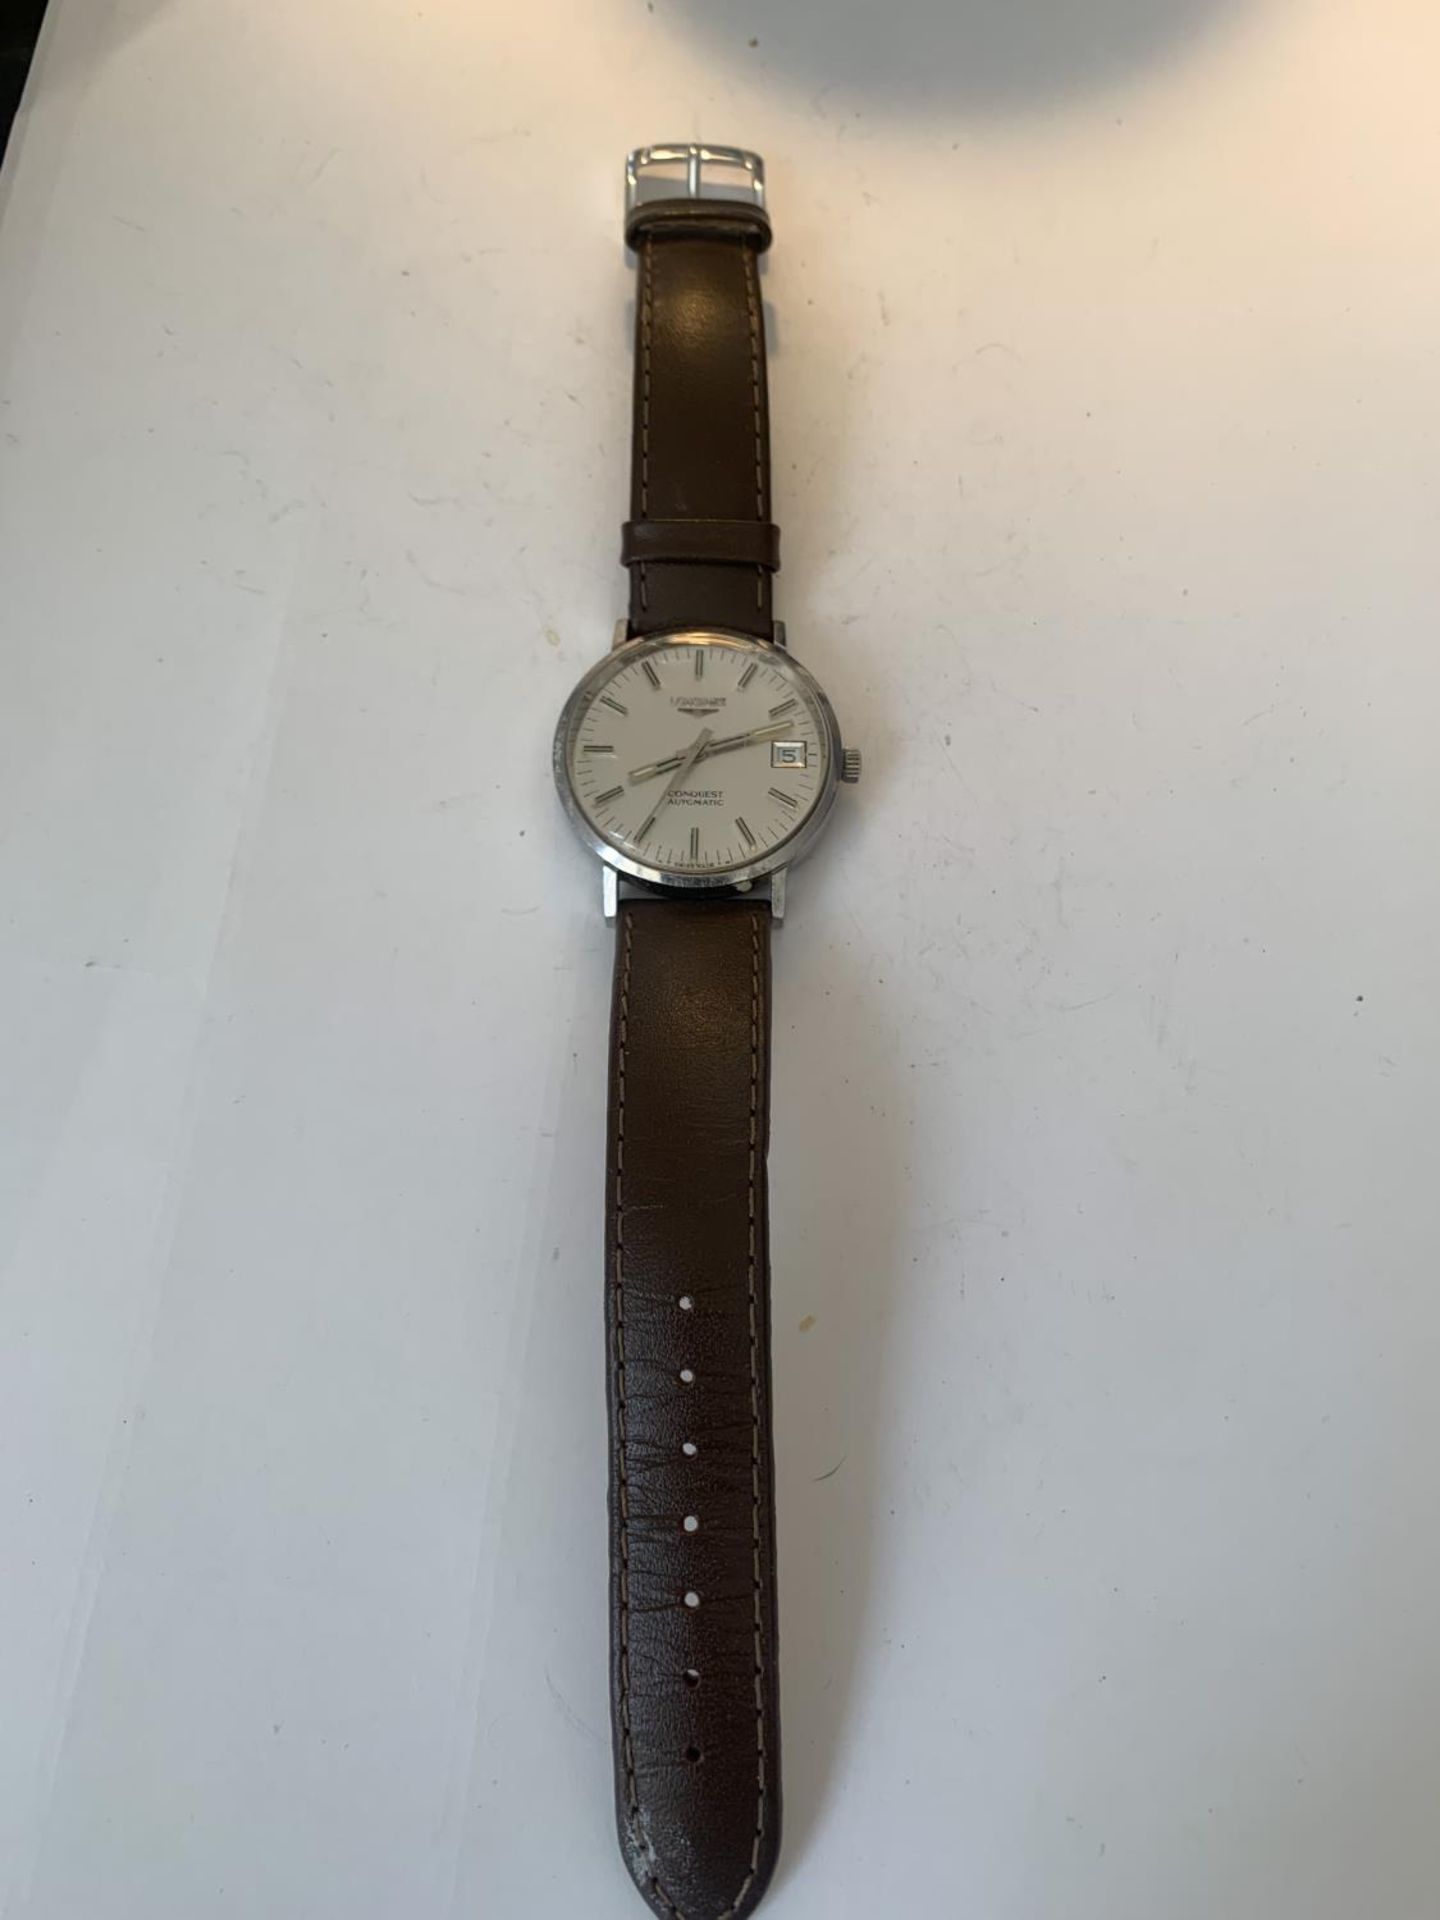 A VINTAGE LONGINES CONQUEST AUTOMATIC WRIST WATCH WITH LEATHER STRAP SEEN WORKING BUT NO WARRANTY